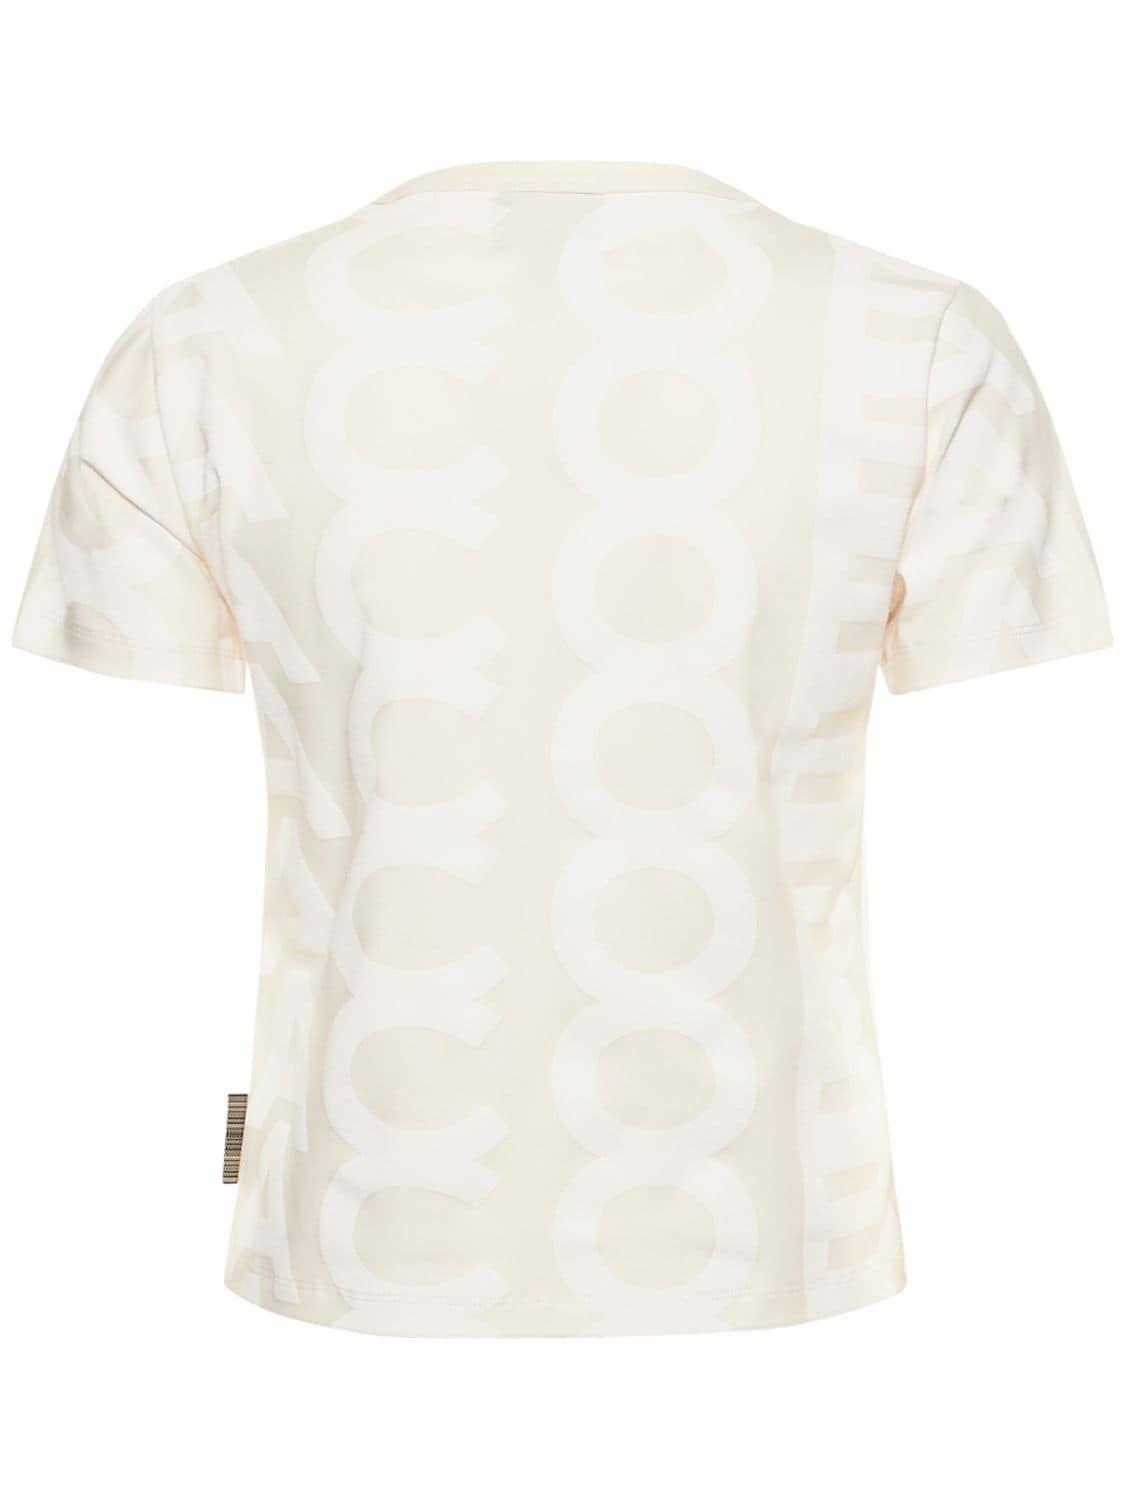 Marc Jacobs The Monogram Baby Tee in Silver/Bright White, Size Xs